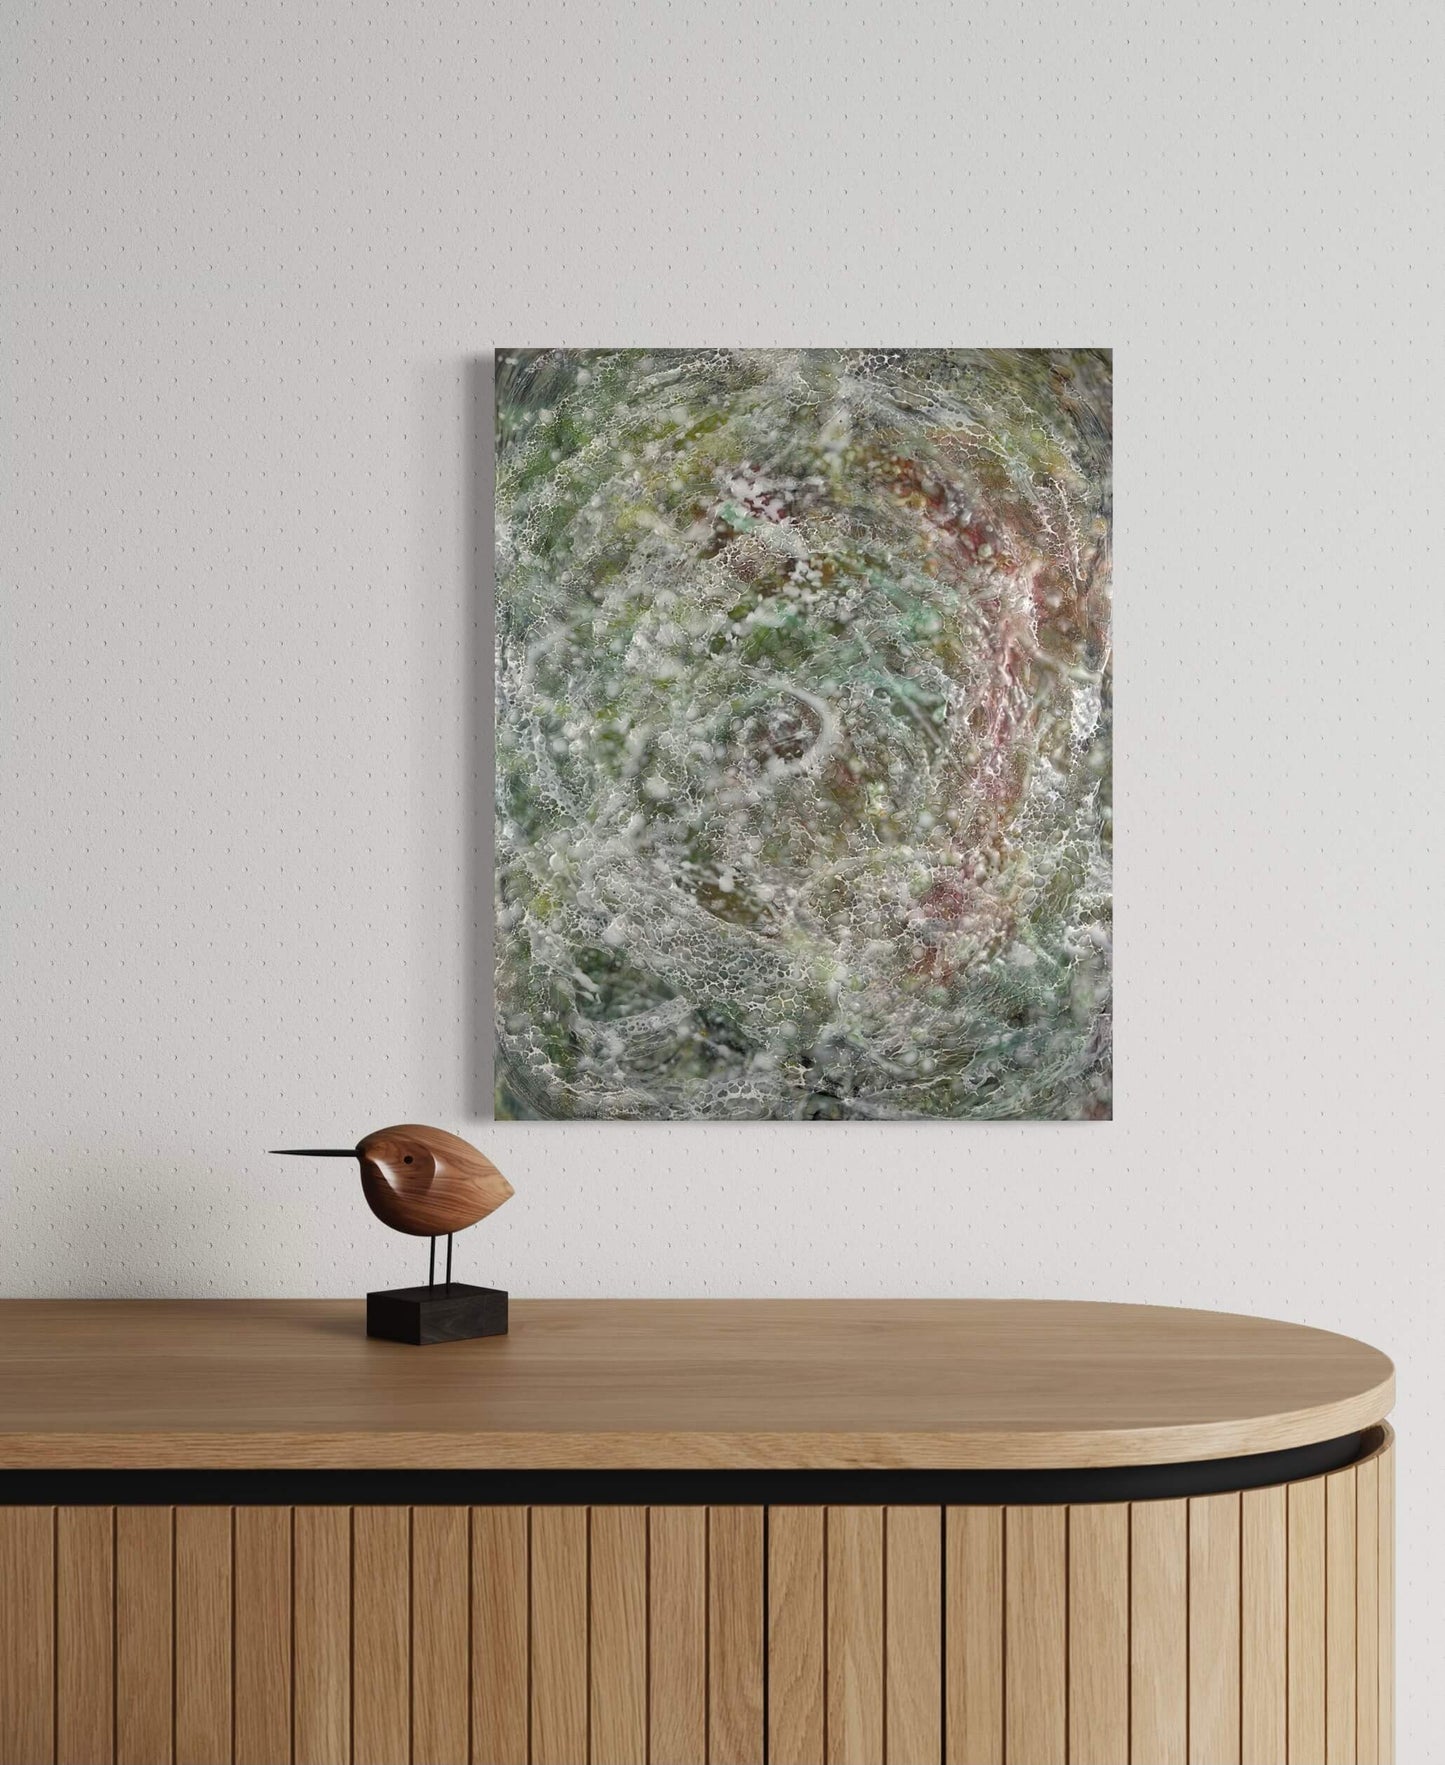 In situ.This painting has rippled texture with warm greens, orange, yellow and reds. Wispy lace-like texture of shellac creates movement within the painting.